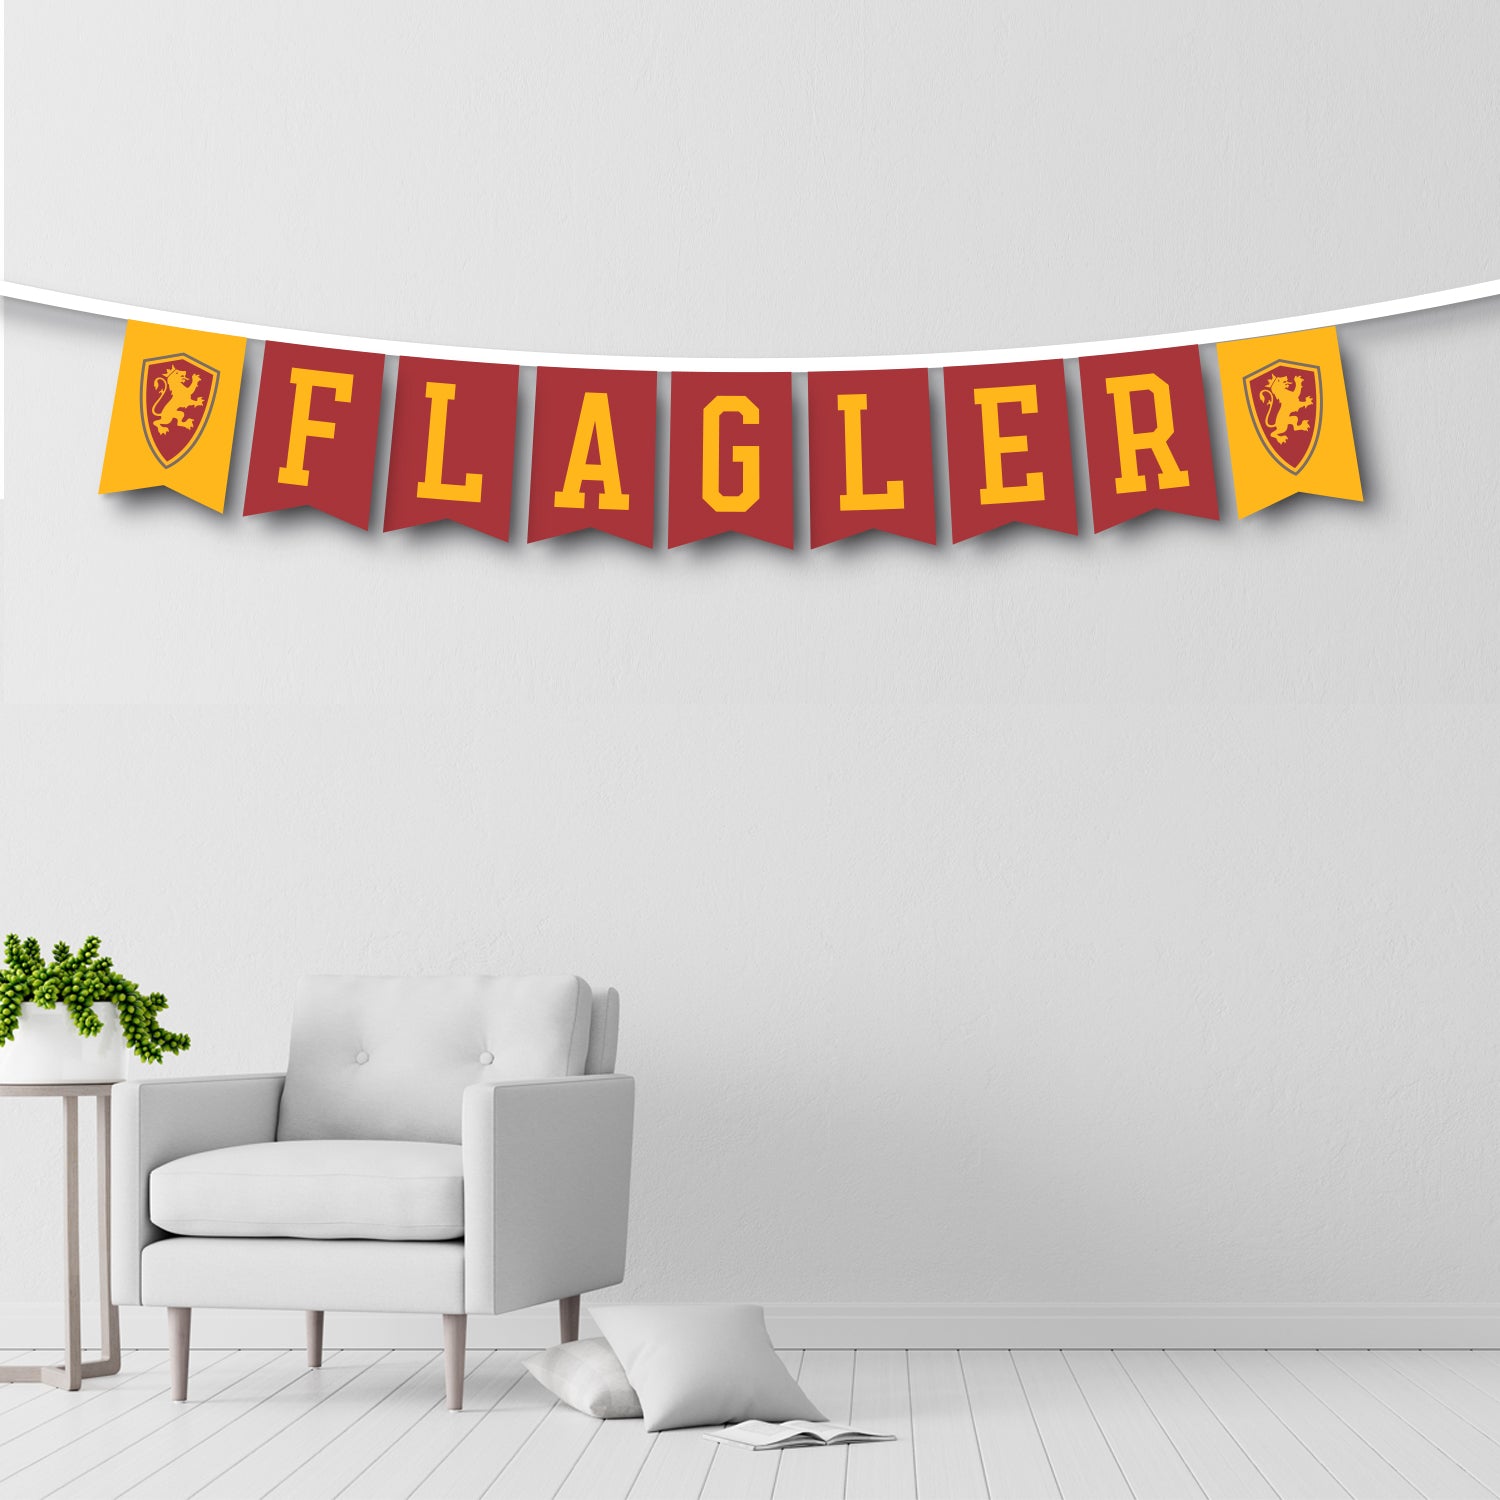 Crimson and gold string banner with flagler shield logo on two gold and yellow imprint Saying Flagler on the crimson